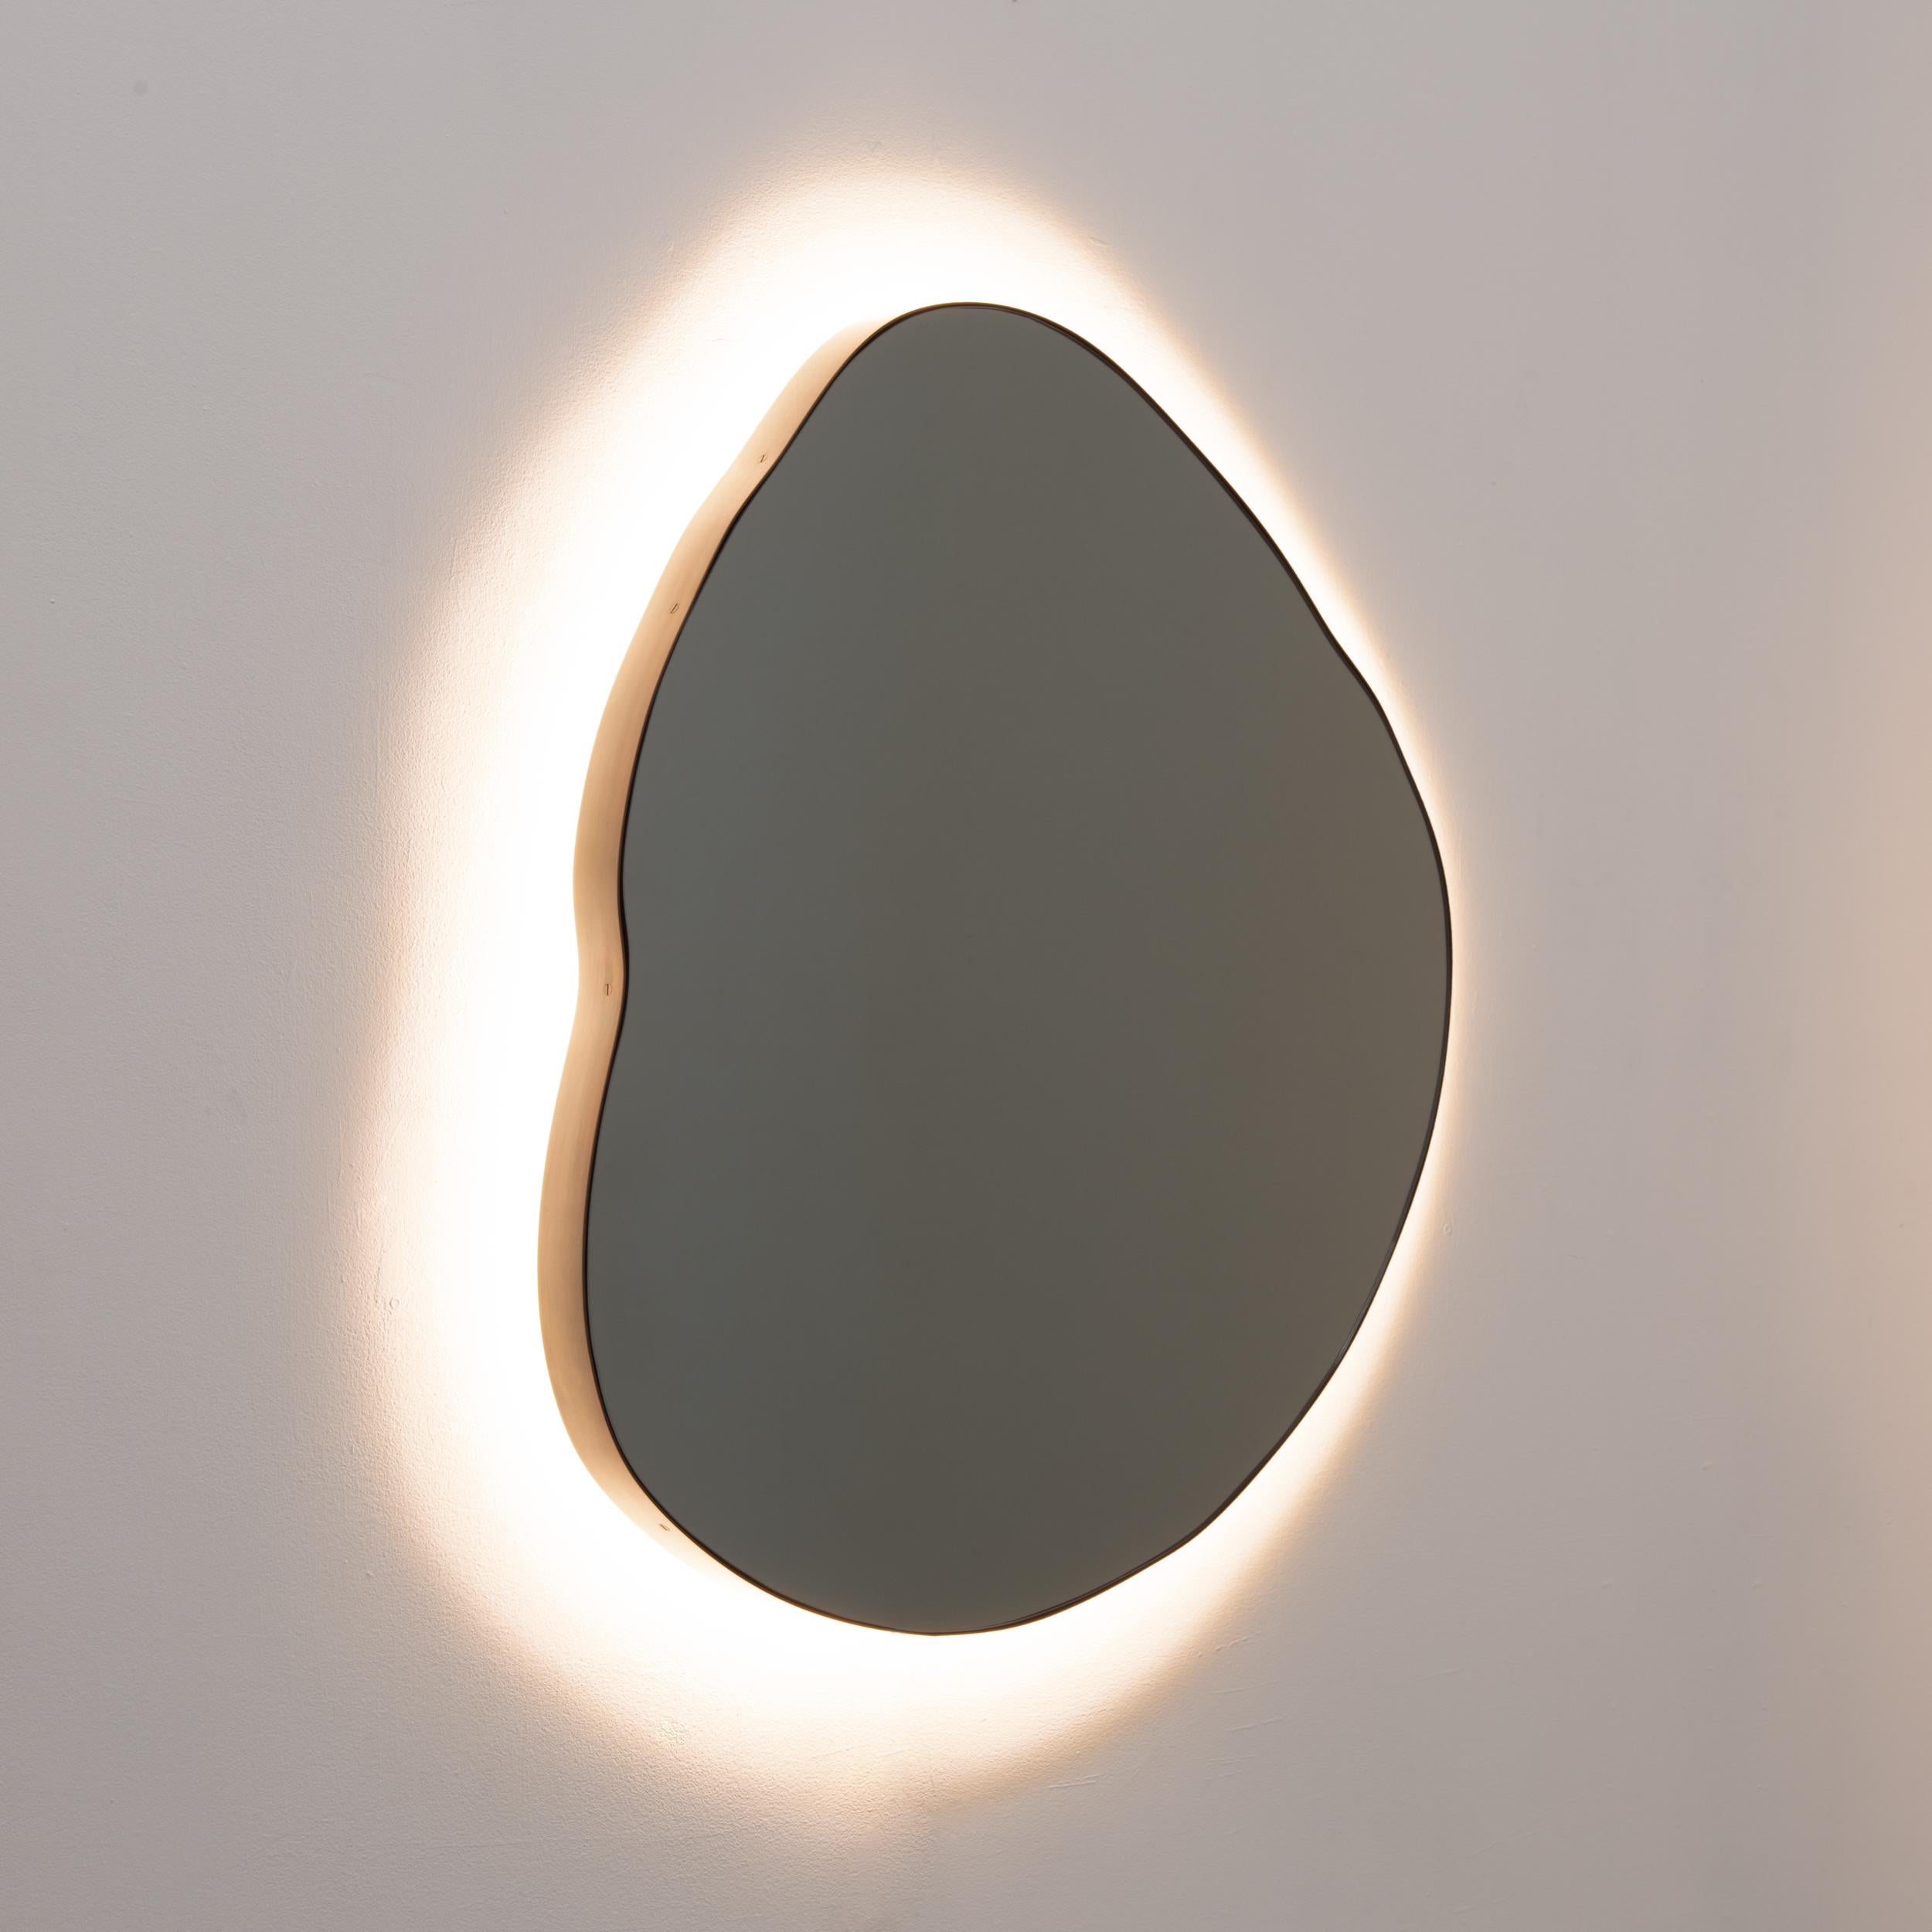 Playful and modern Ergon™ organic shaped back illuminated black tinted mirror with a patina brass frame. Designed and made in London, UK.

Our mirrors are designed with an integrated French cleat (split batten) system that ensures the mirror is